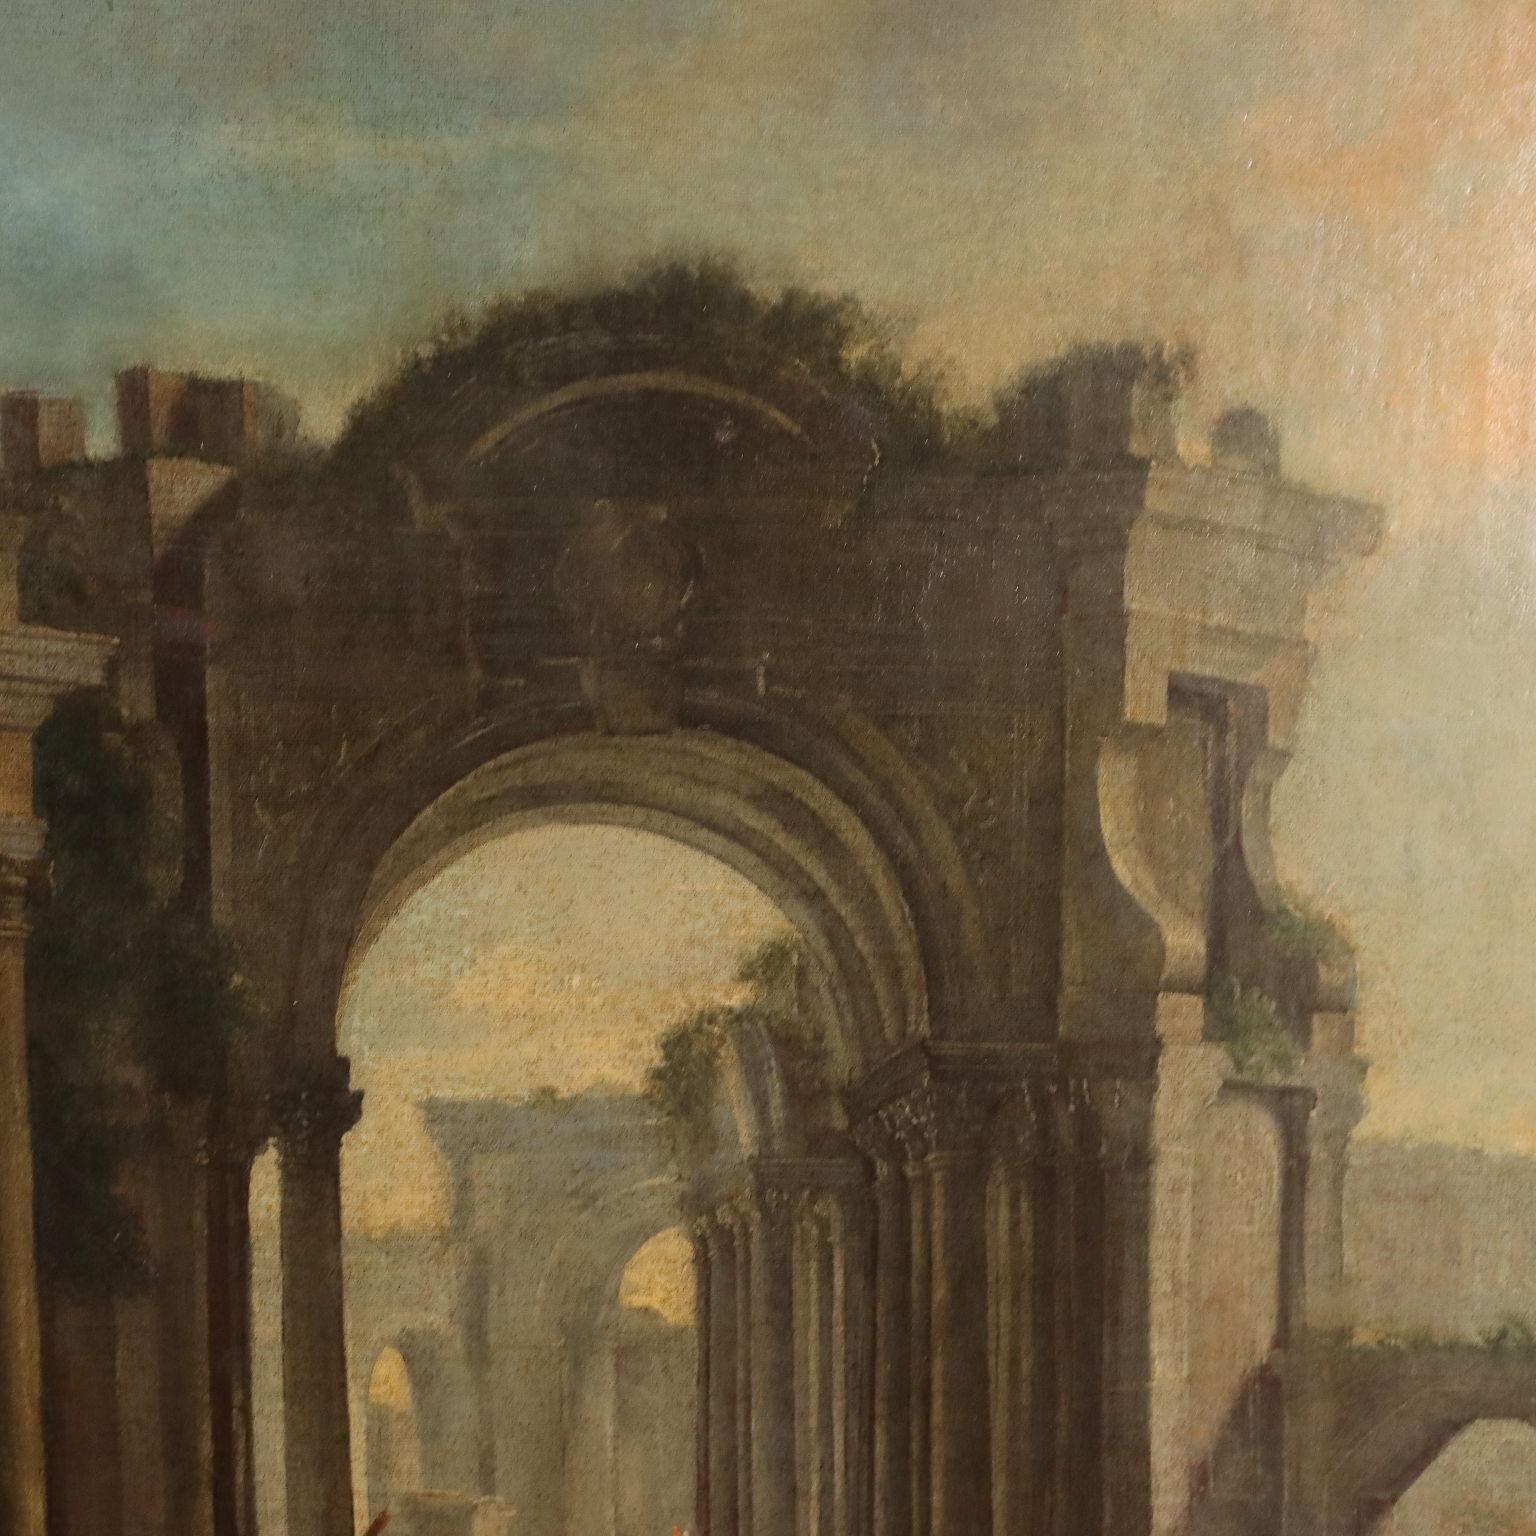 Oil painting on canvas. Neapolitan school of the eighteenth century. Of great impact and of good executive quality, the work refers in the ways to the works of Leonardo Coccorante (1680-1750), a Neapolitan artist known for his highly detailed